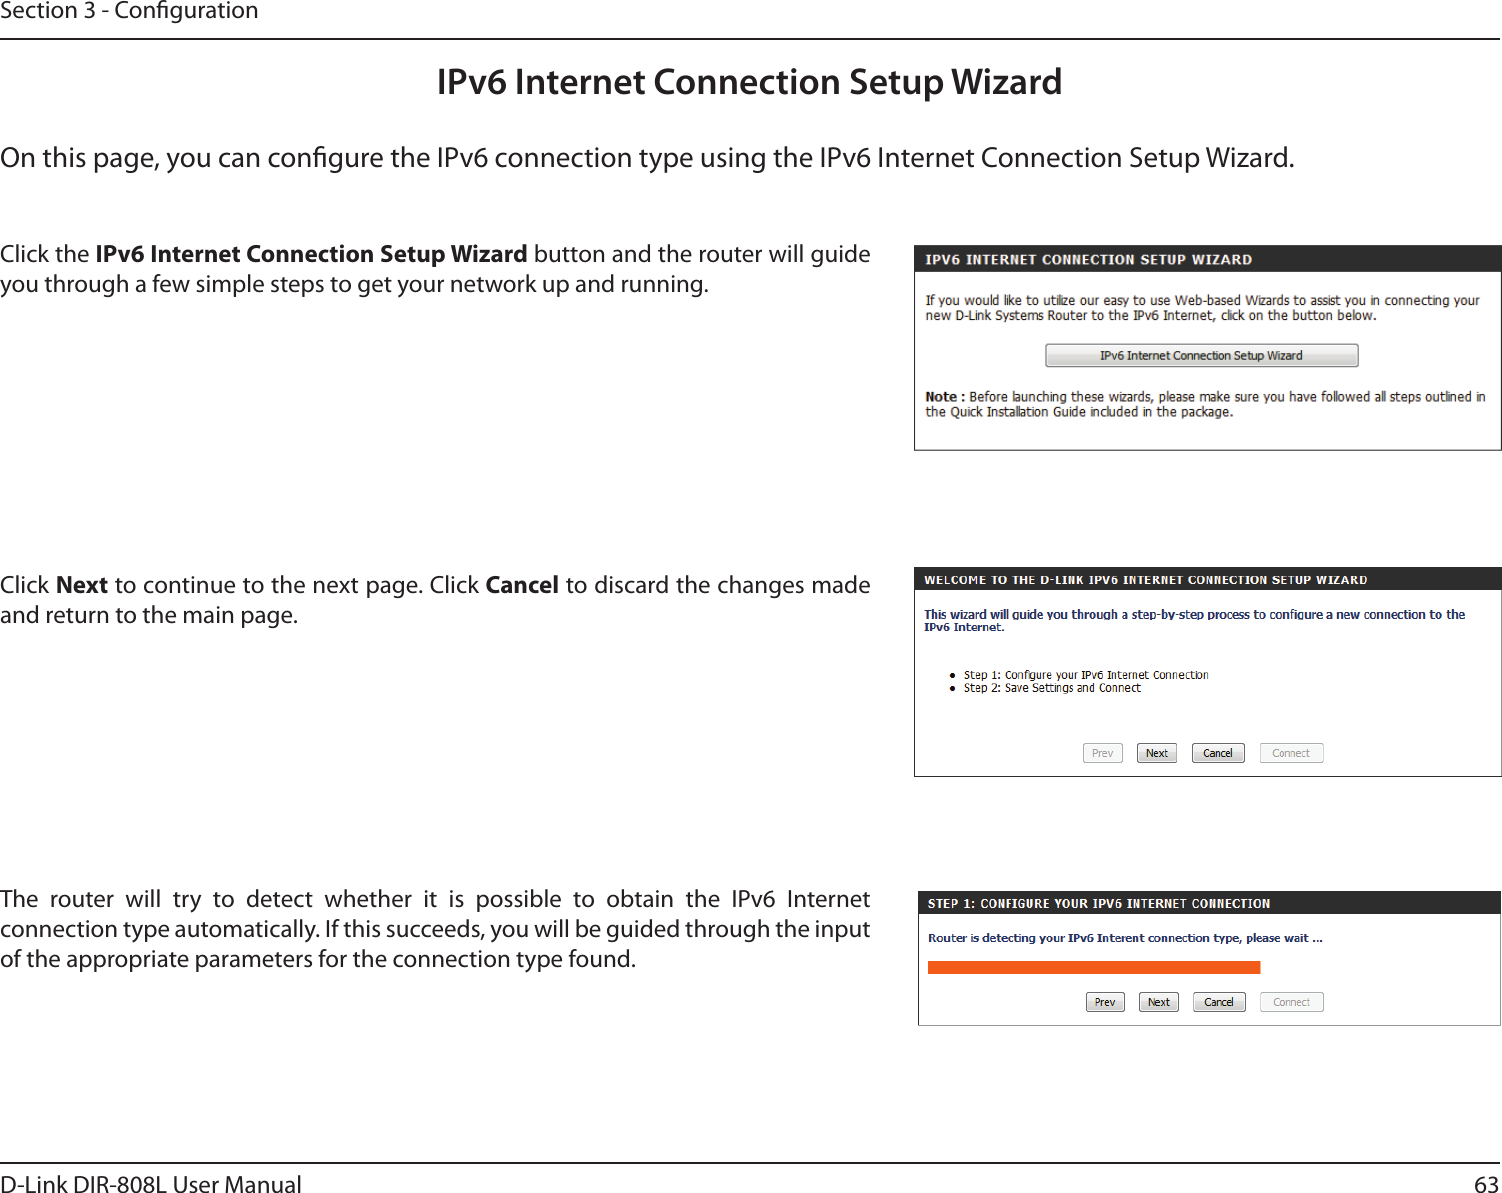 63D-Link DIR-808L User ManualSection 3 - CongurationIPv6 Internet Connection Setup WizardOn this page, you can congure the IPv6 connection type using the IPv6 Internet Connection Setup Wizard.Click the IPv6 Internet Connection Setup Wizard button and the router will guide you through a few simple steps to get your network up and running.Click Next to continue to the next page. Click Cancel to discard the changes made and return to the main page.The  router  will  try  to  detect  whether  it  is  possible  to  obtain  the  IPv6  Internet connection type automatically. If this succeeds, you will be guided through the input of the appropriate parameters for the connection type found.